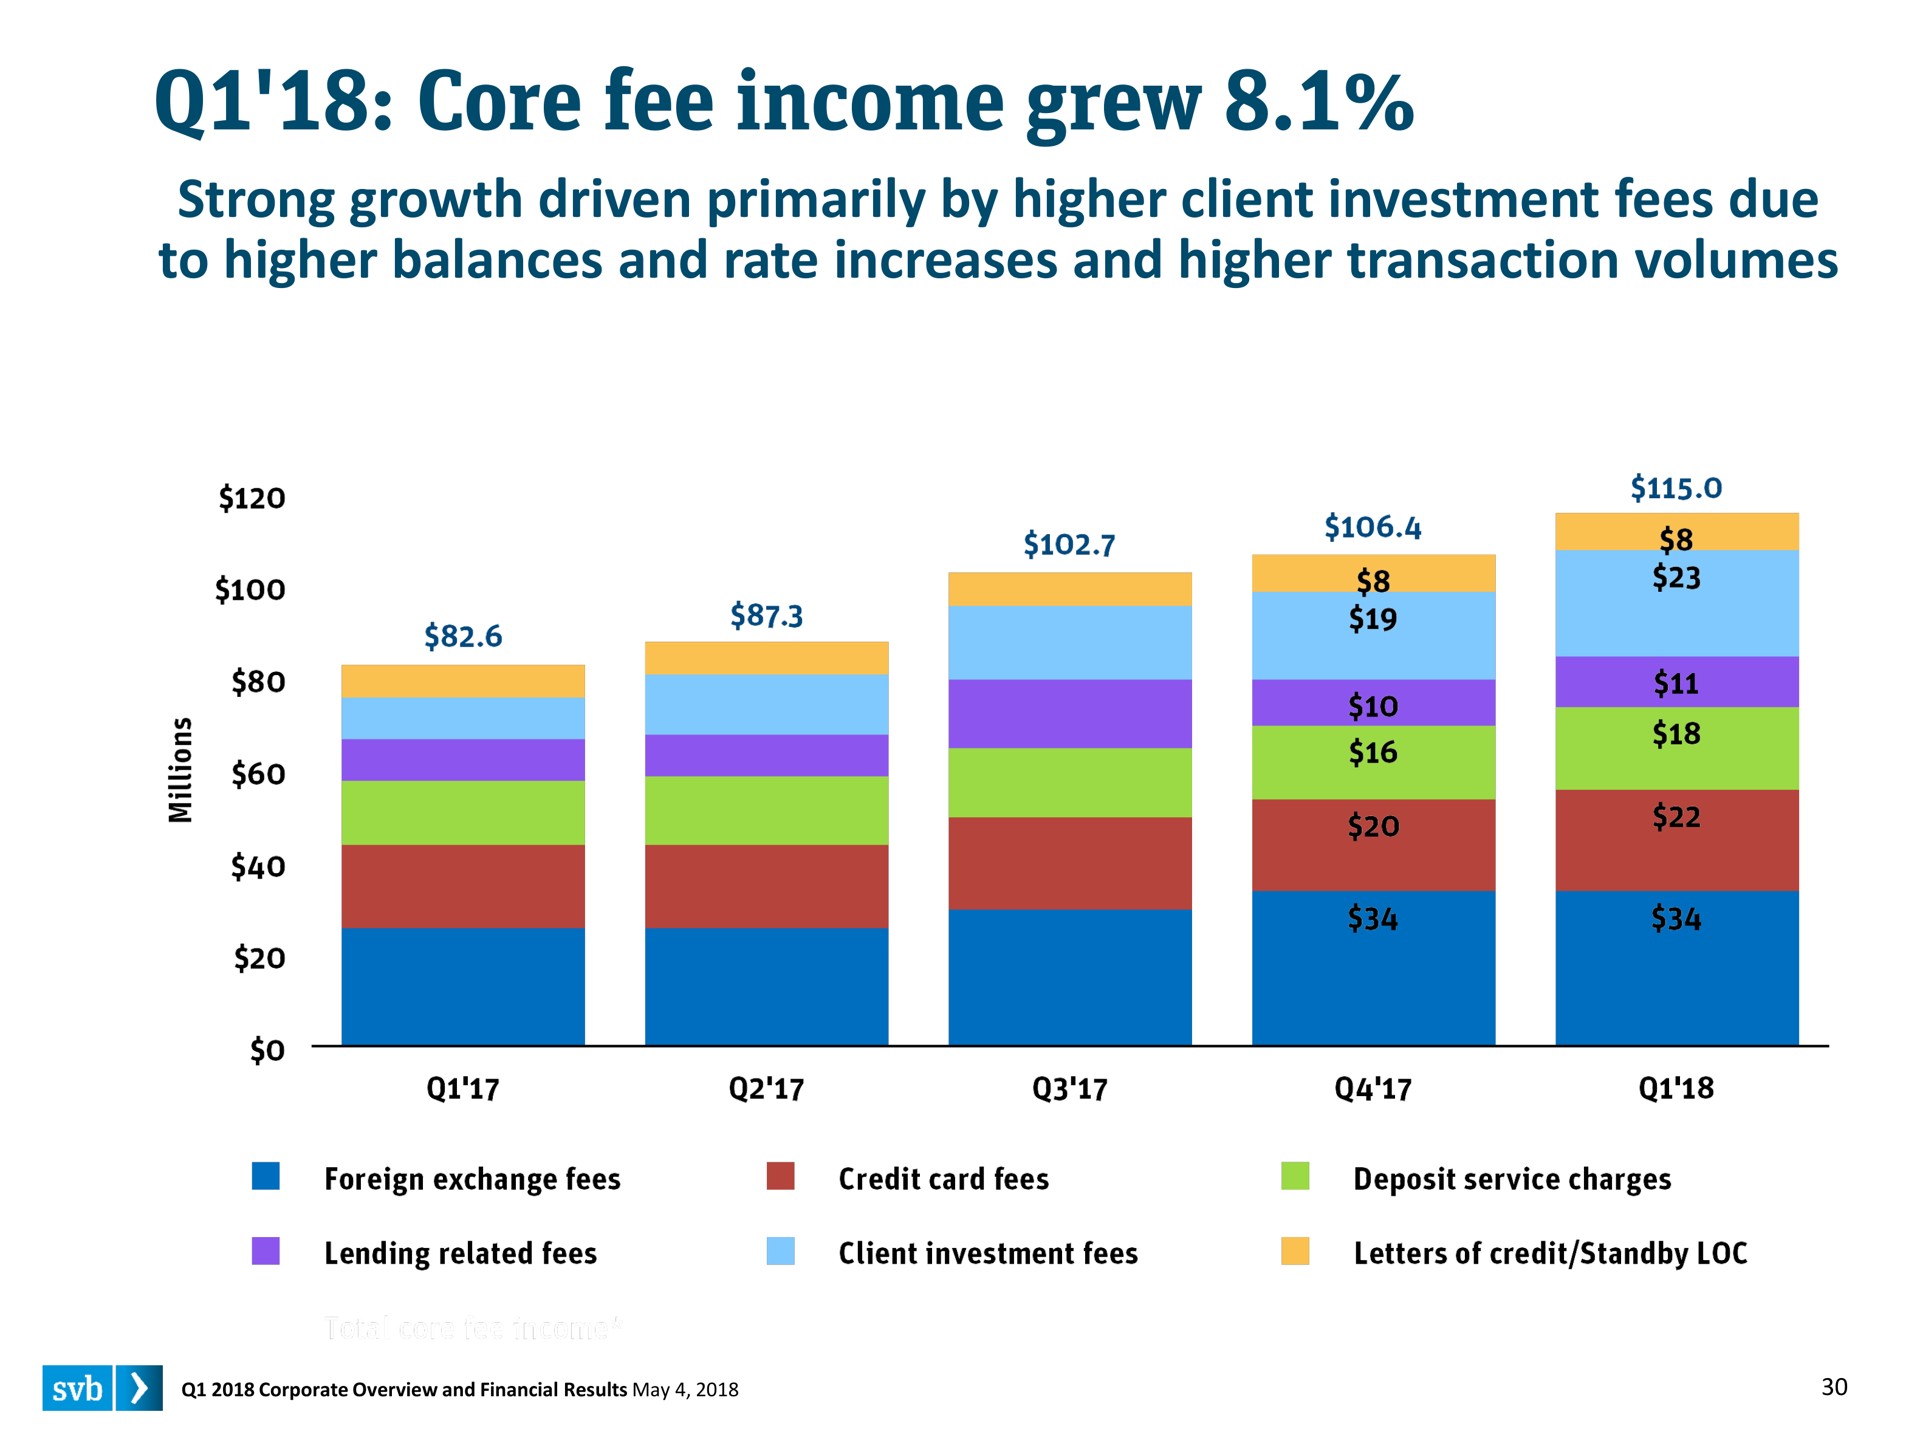 core fee income grew strong growth driven primarily by higher client investment fees due to higher balances and rate increases and higher transaction volumes | Silicon Valley Bank